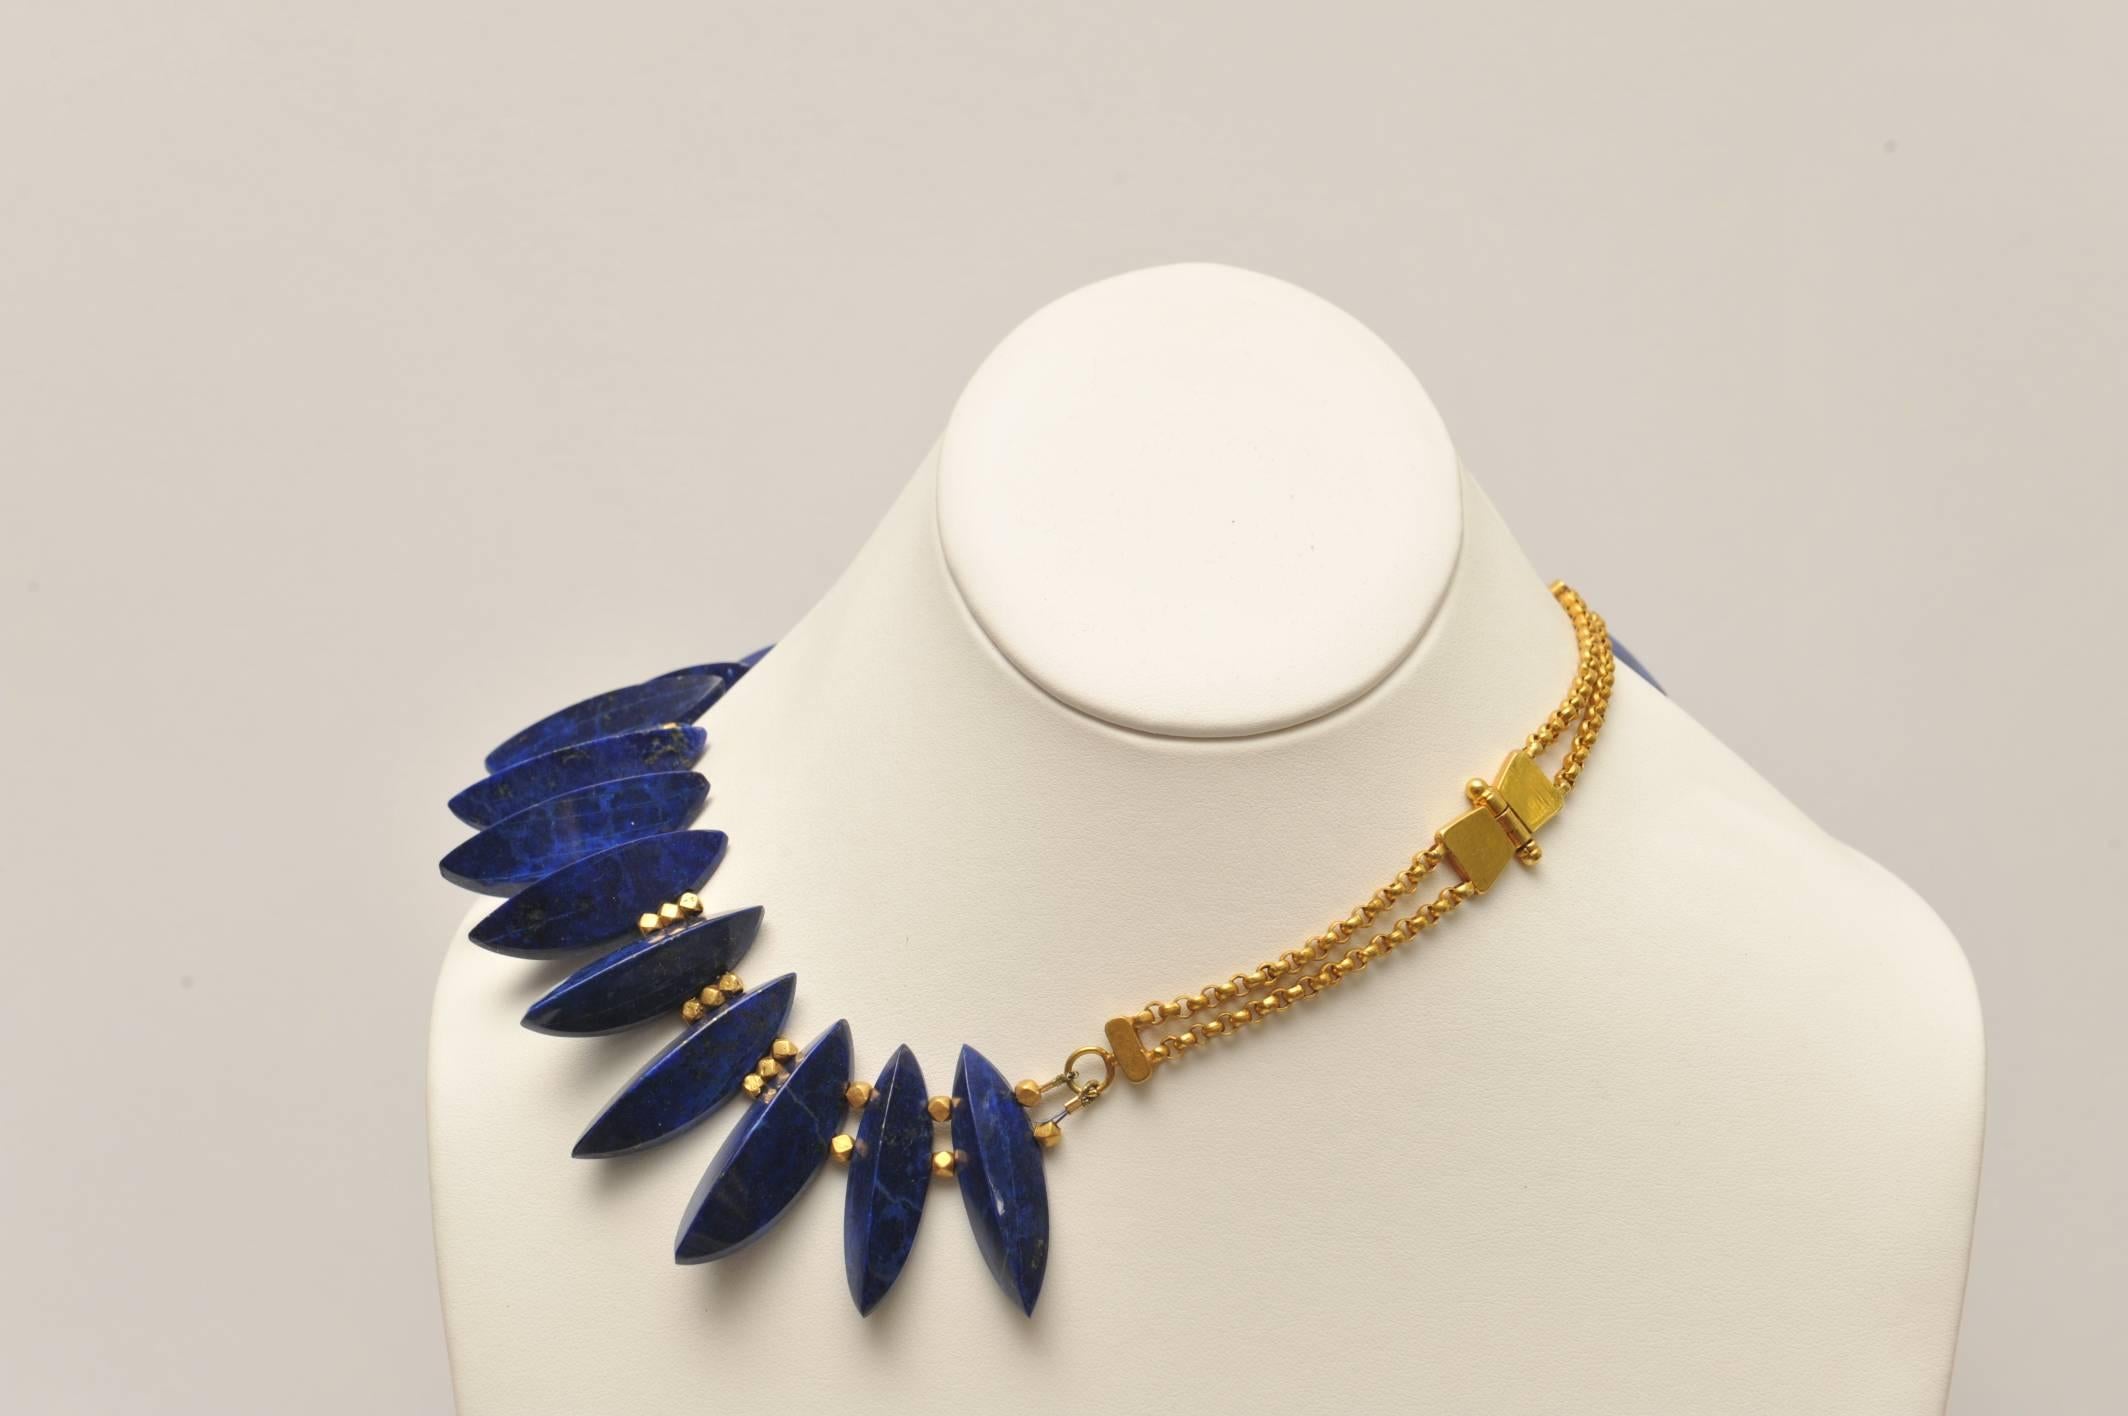 This is an impressive necklace, rare and unusual cut of the natural lapis lazuli with amazing color and flecks of pyrite natural to all un-dyed lapis.  Strung with 22K gold spacers and a double gold chain with a screw clasp.   The longest stone is